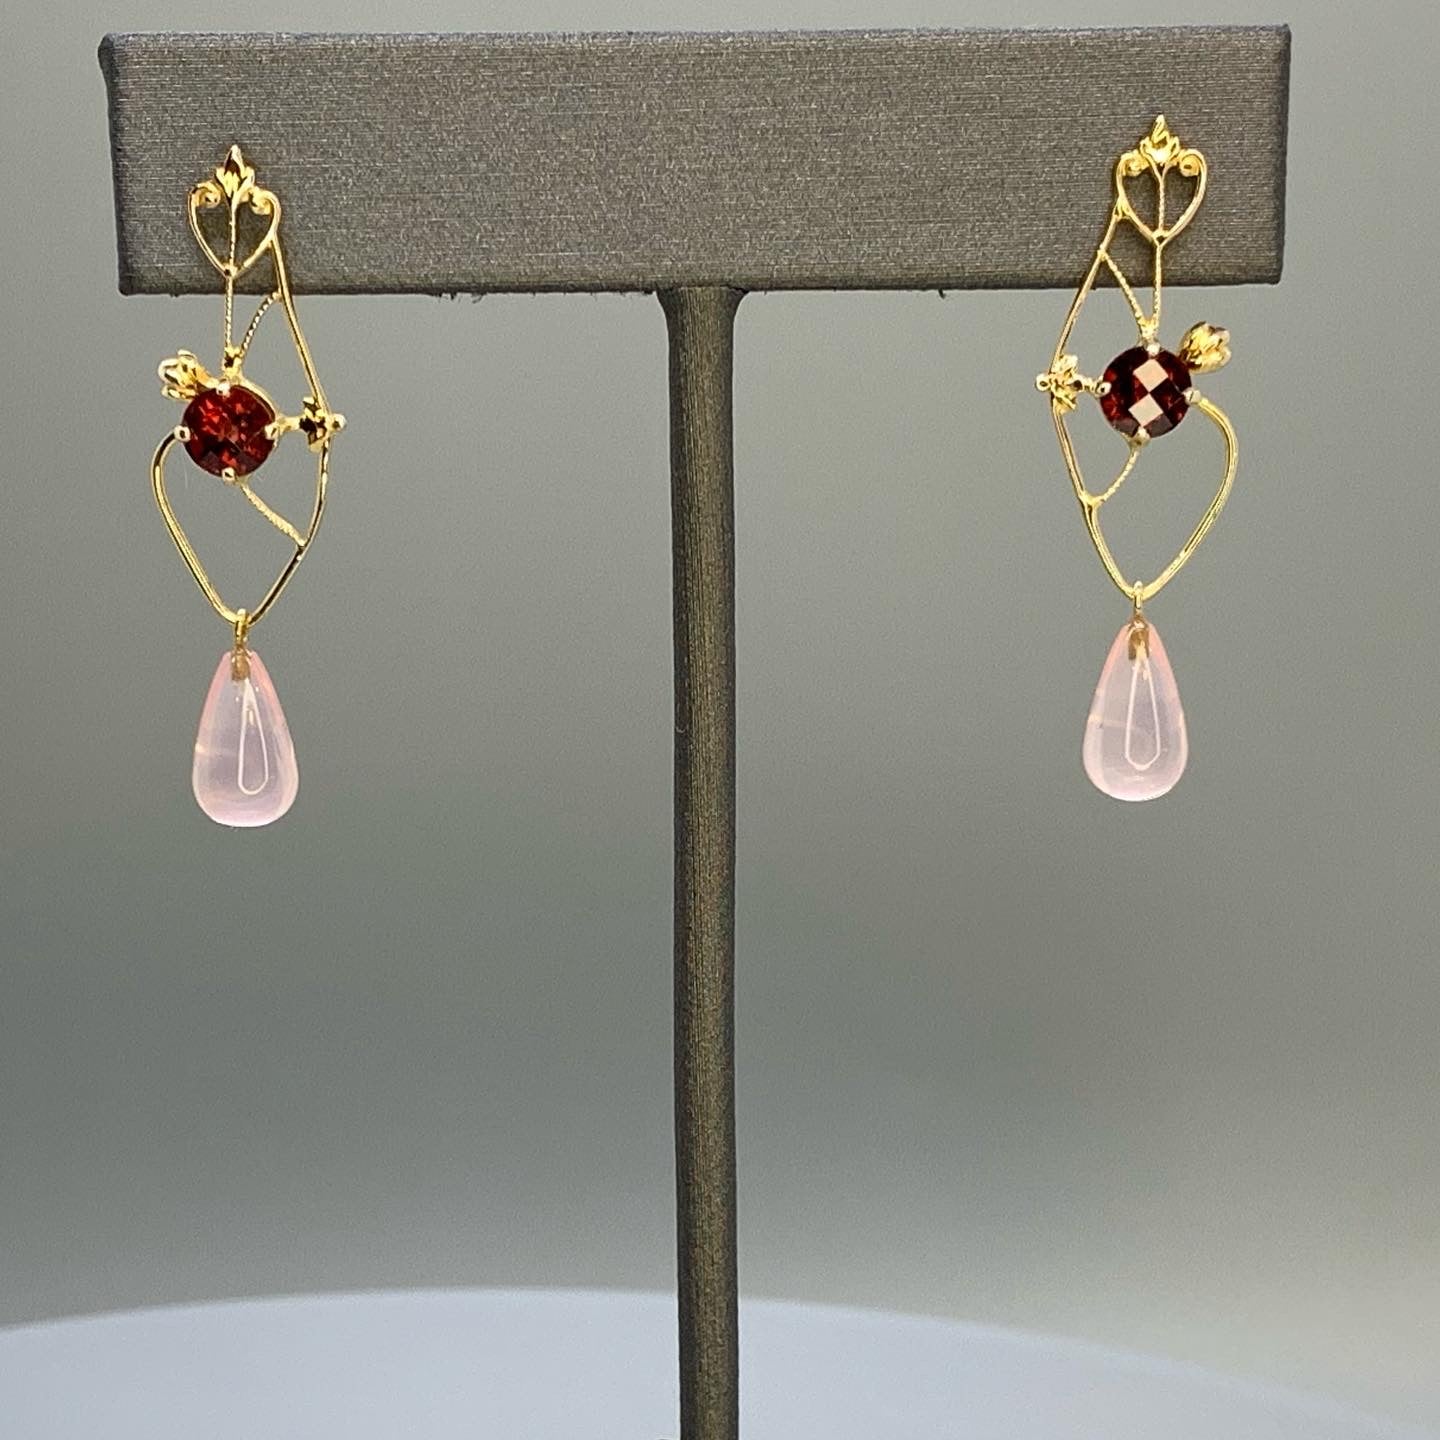 upcycled earrings featuring heart scroll motifs as well as alluding to the shape of a anatomical heart. Earrings have a heart filagree on top where the post is, and a 5mm round checkerboard cut orange/red garnet centered on earrings, and a rose quartz smooth briolette dangle.